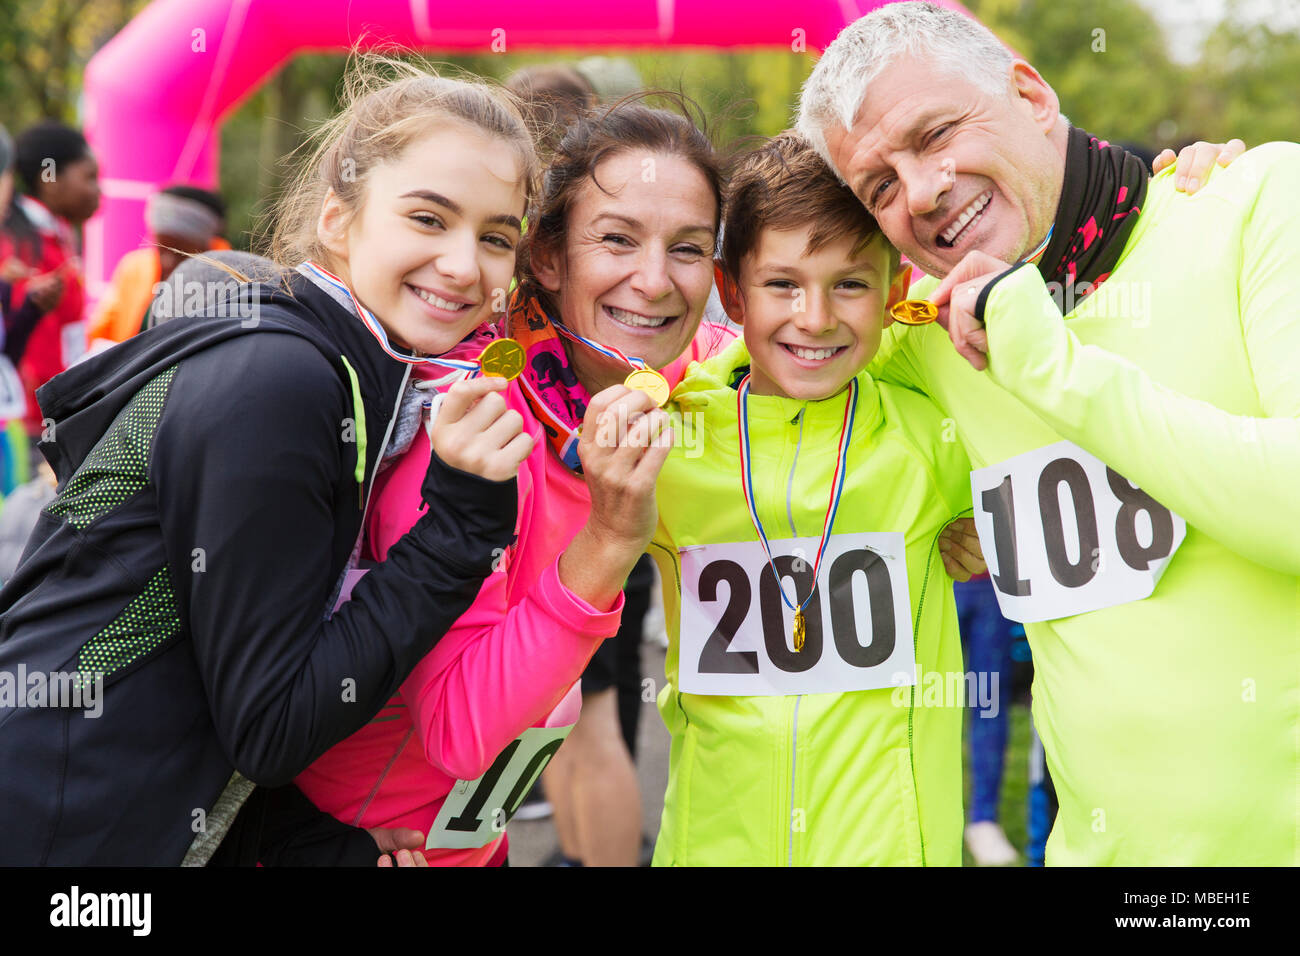 Portrait smiling, confident family runners showing medals at charity run Stock Photo